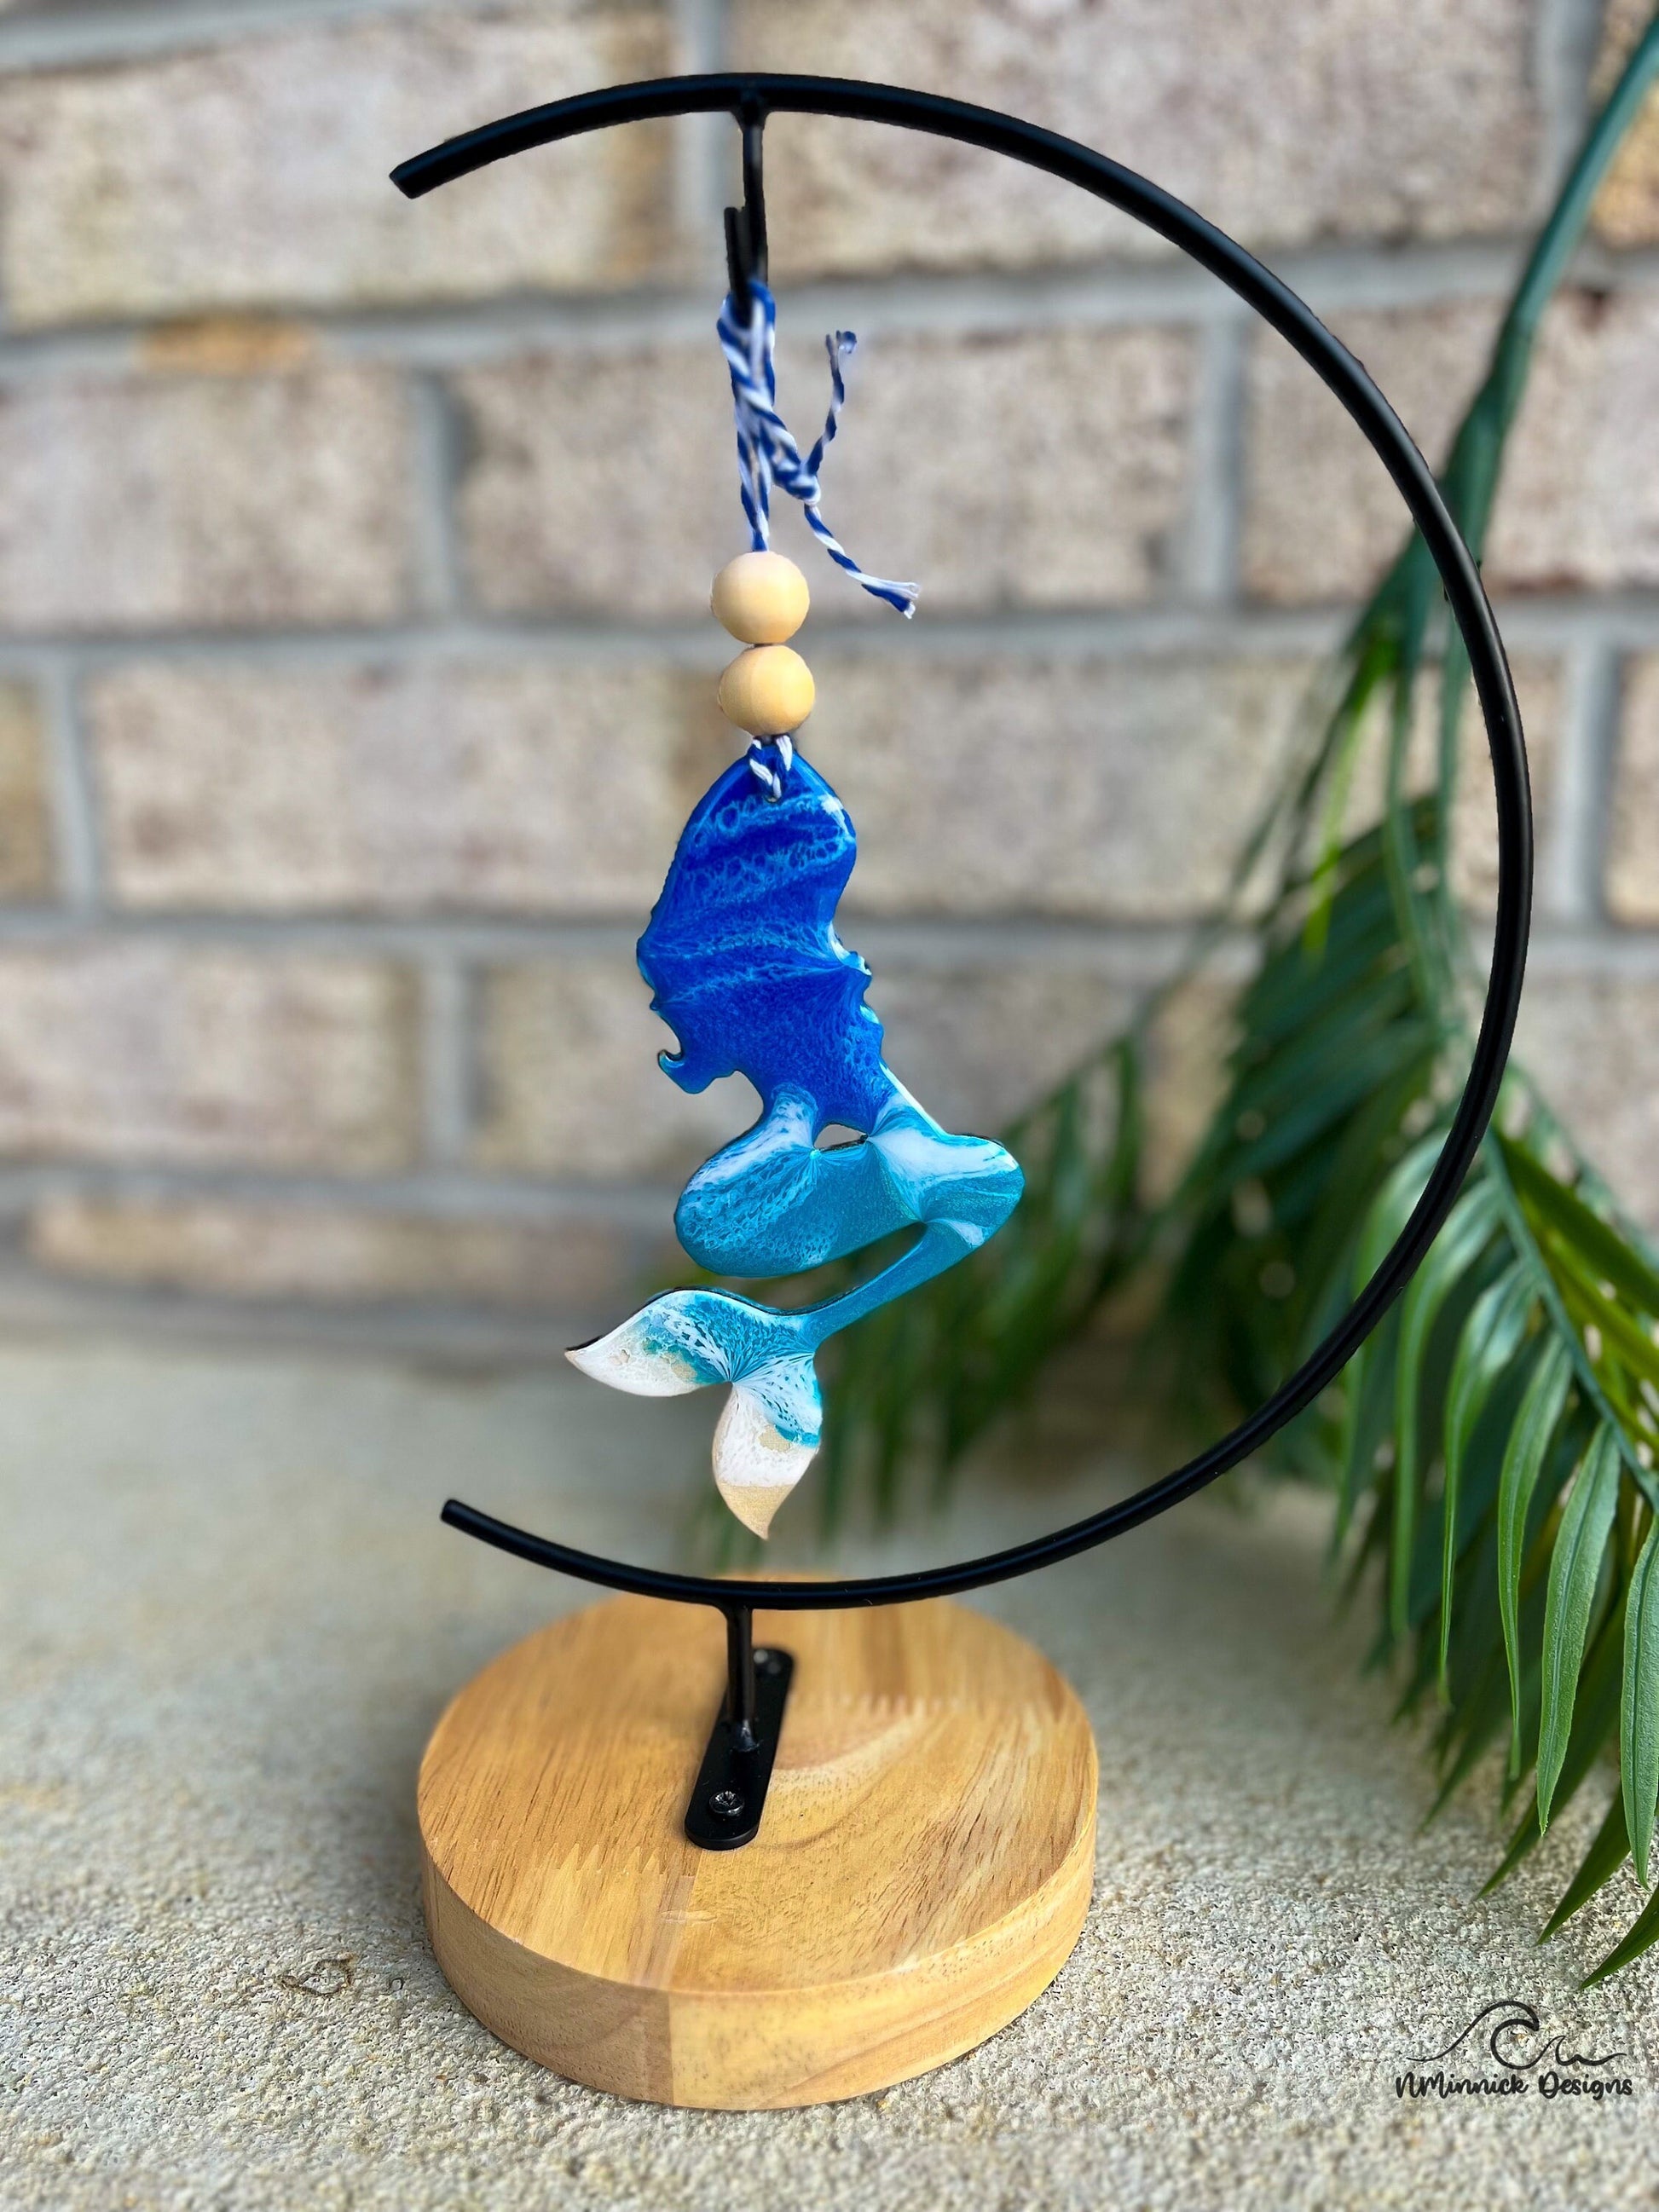 Mermaid shaped ornament with ocean resin art hanging from an ornament stand.